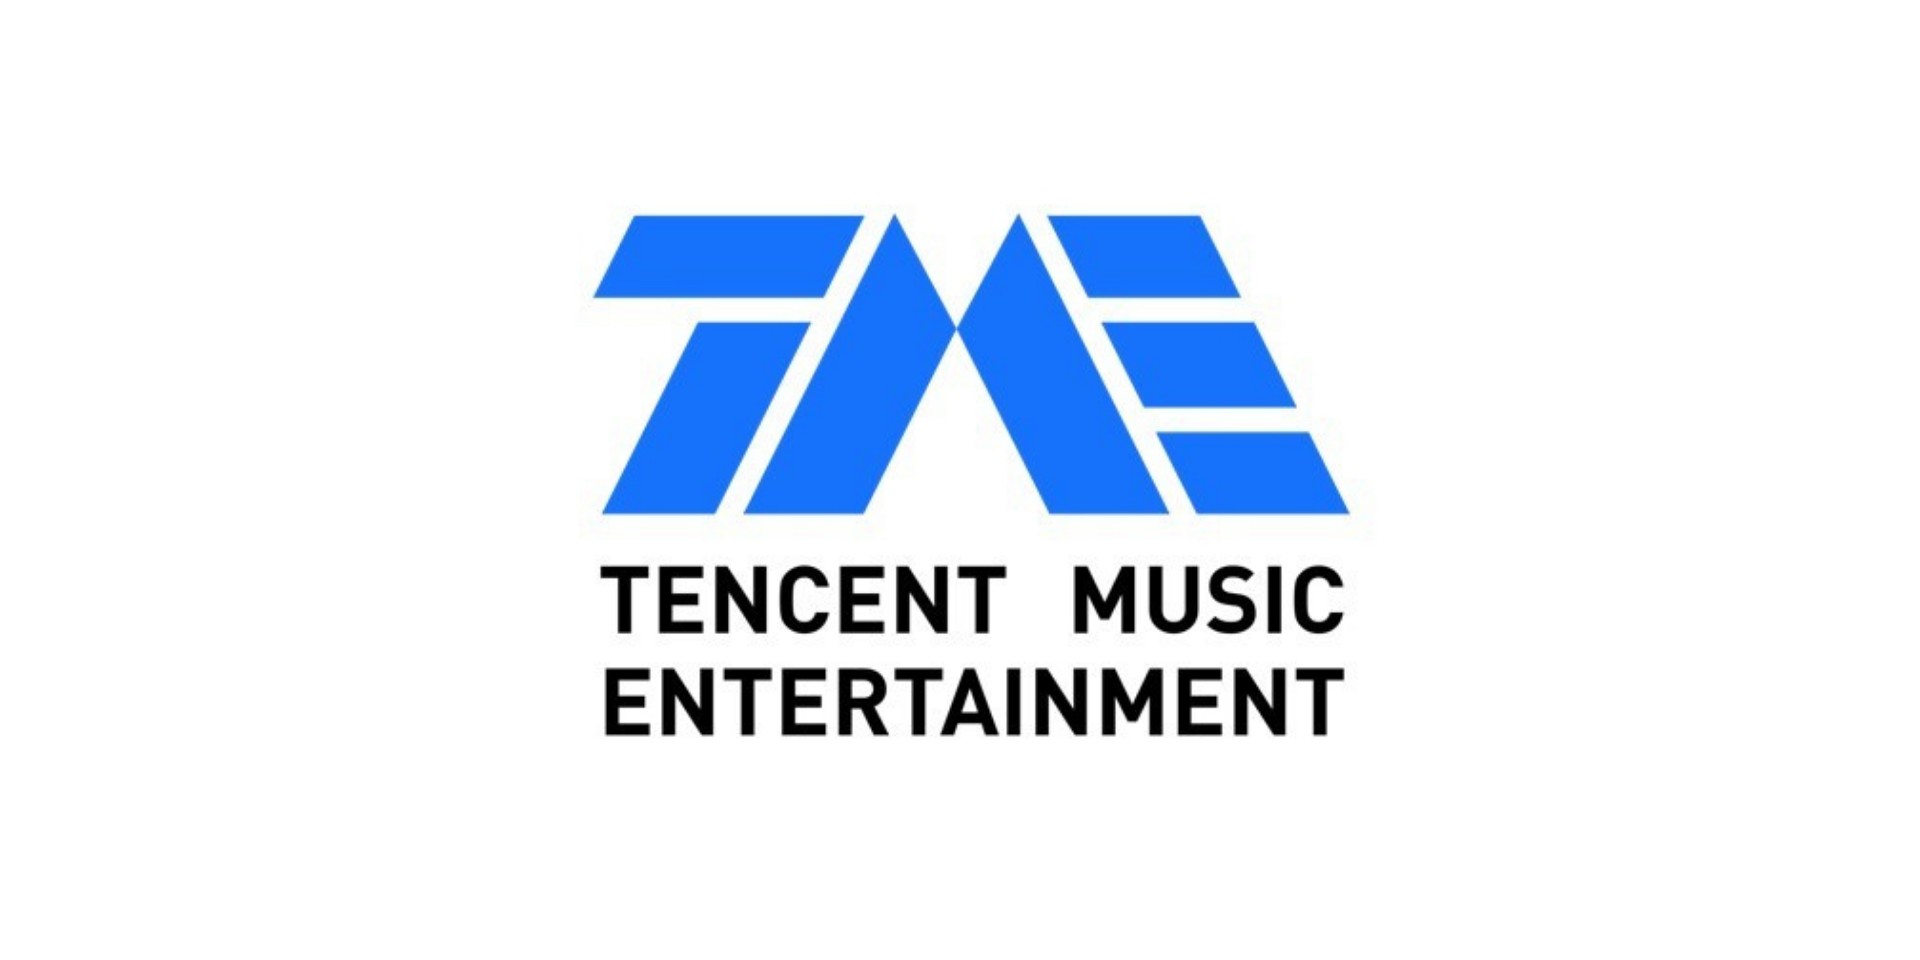 Tencent Music Entertainment records 5 million new online music paying users, to increase video content